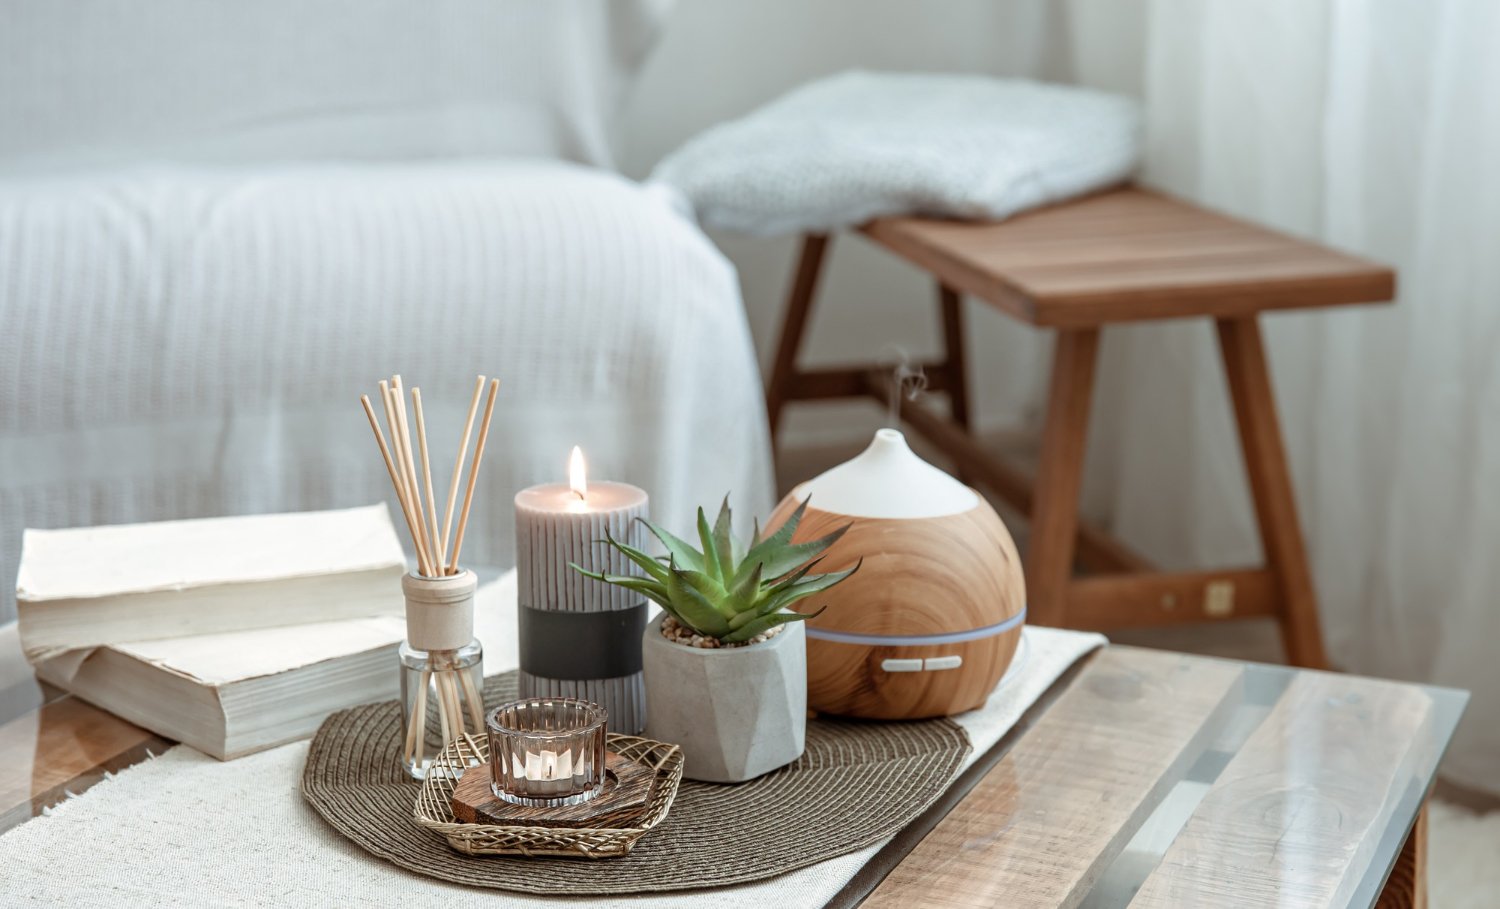 composition-with-incense-sticks-diffuser-candles-books-table-interior-room.jpg